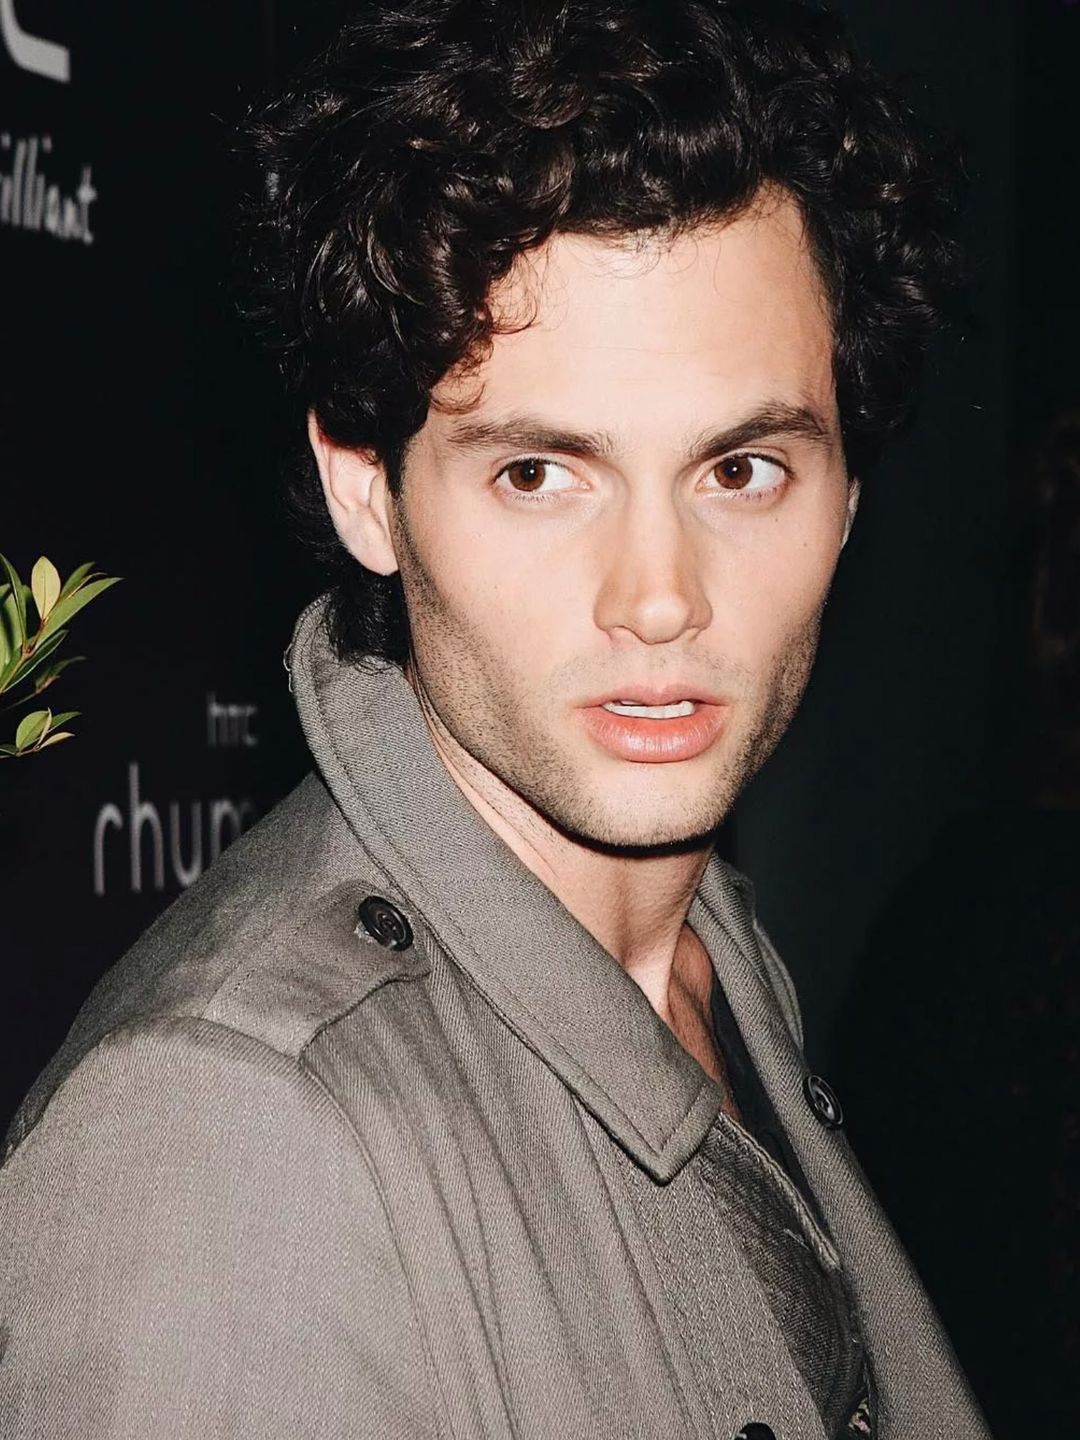 Penn Badgley does he have kids